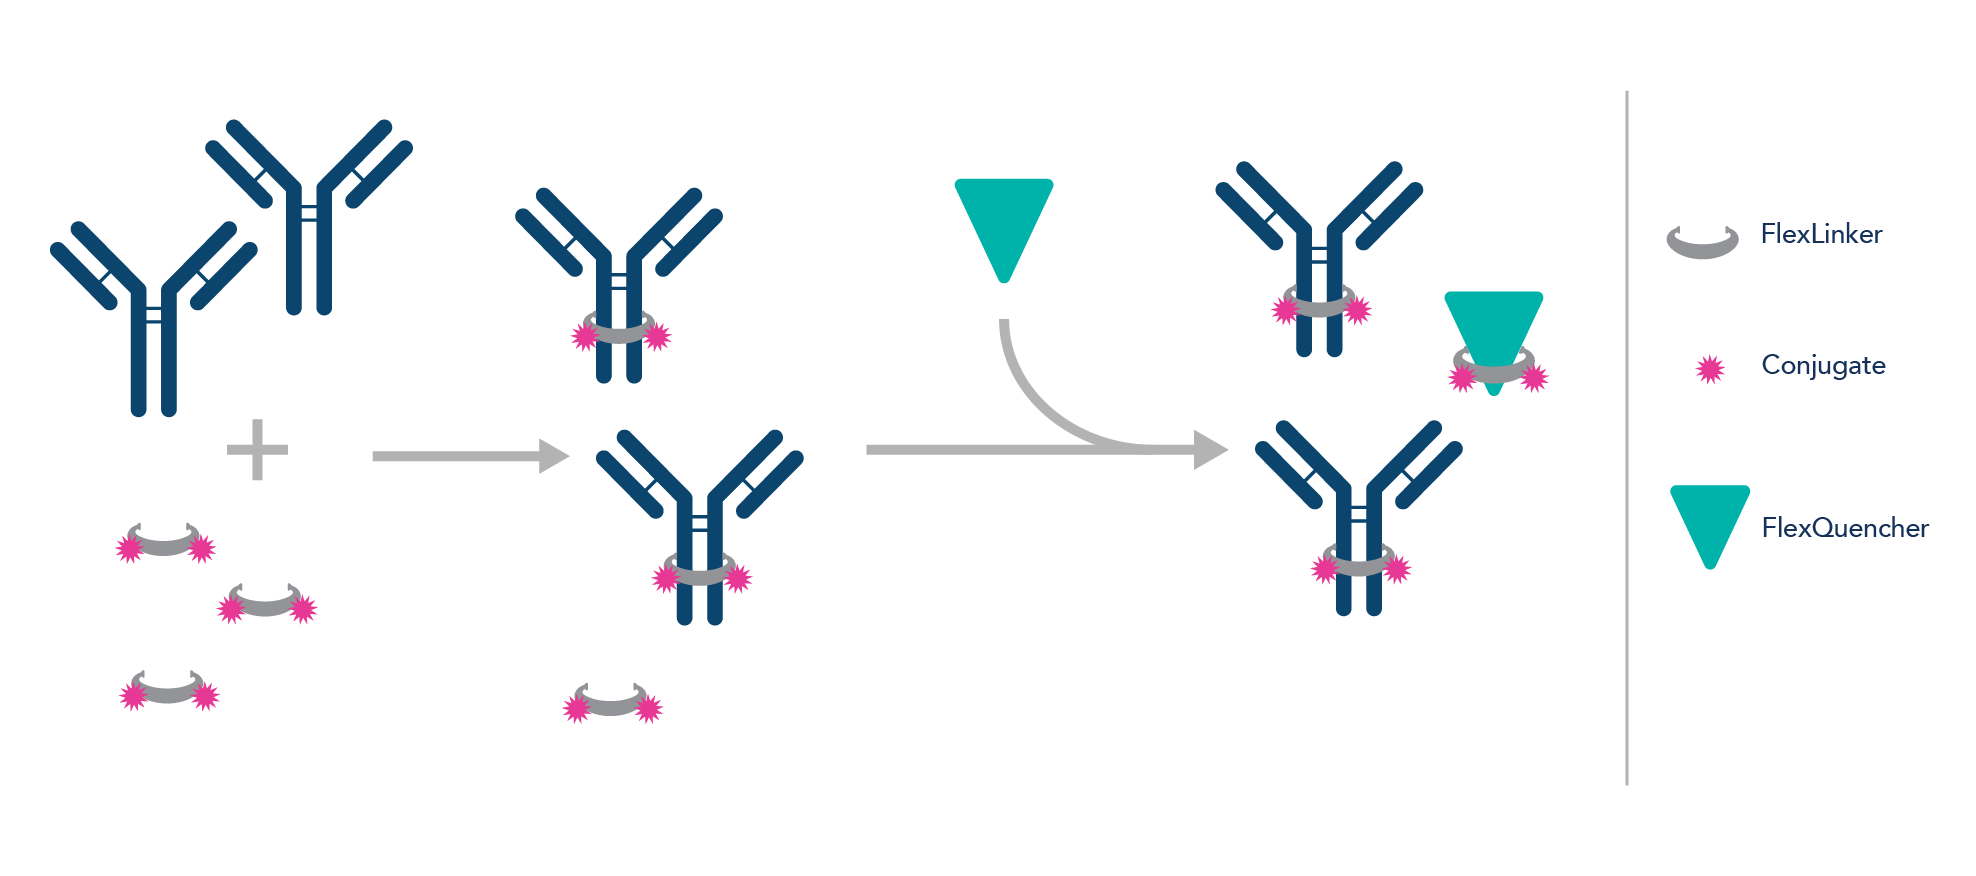 Antibody labeling with Proteintech's FlexAble kit is achieved by using a high affinity non-covalent linker that binds tightly to the antibody within minutes and remains attached indefinitely.